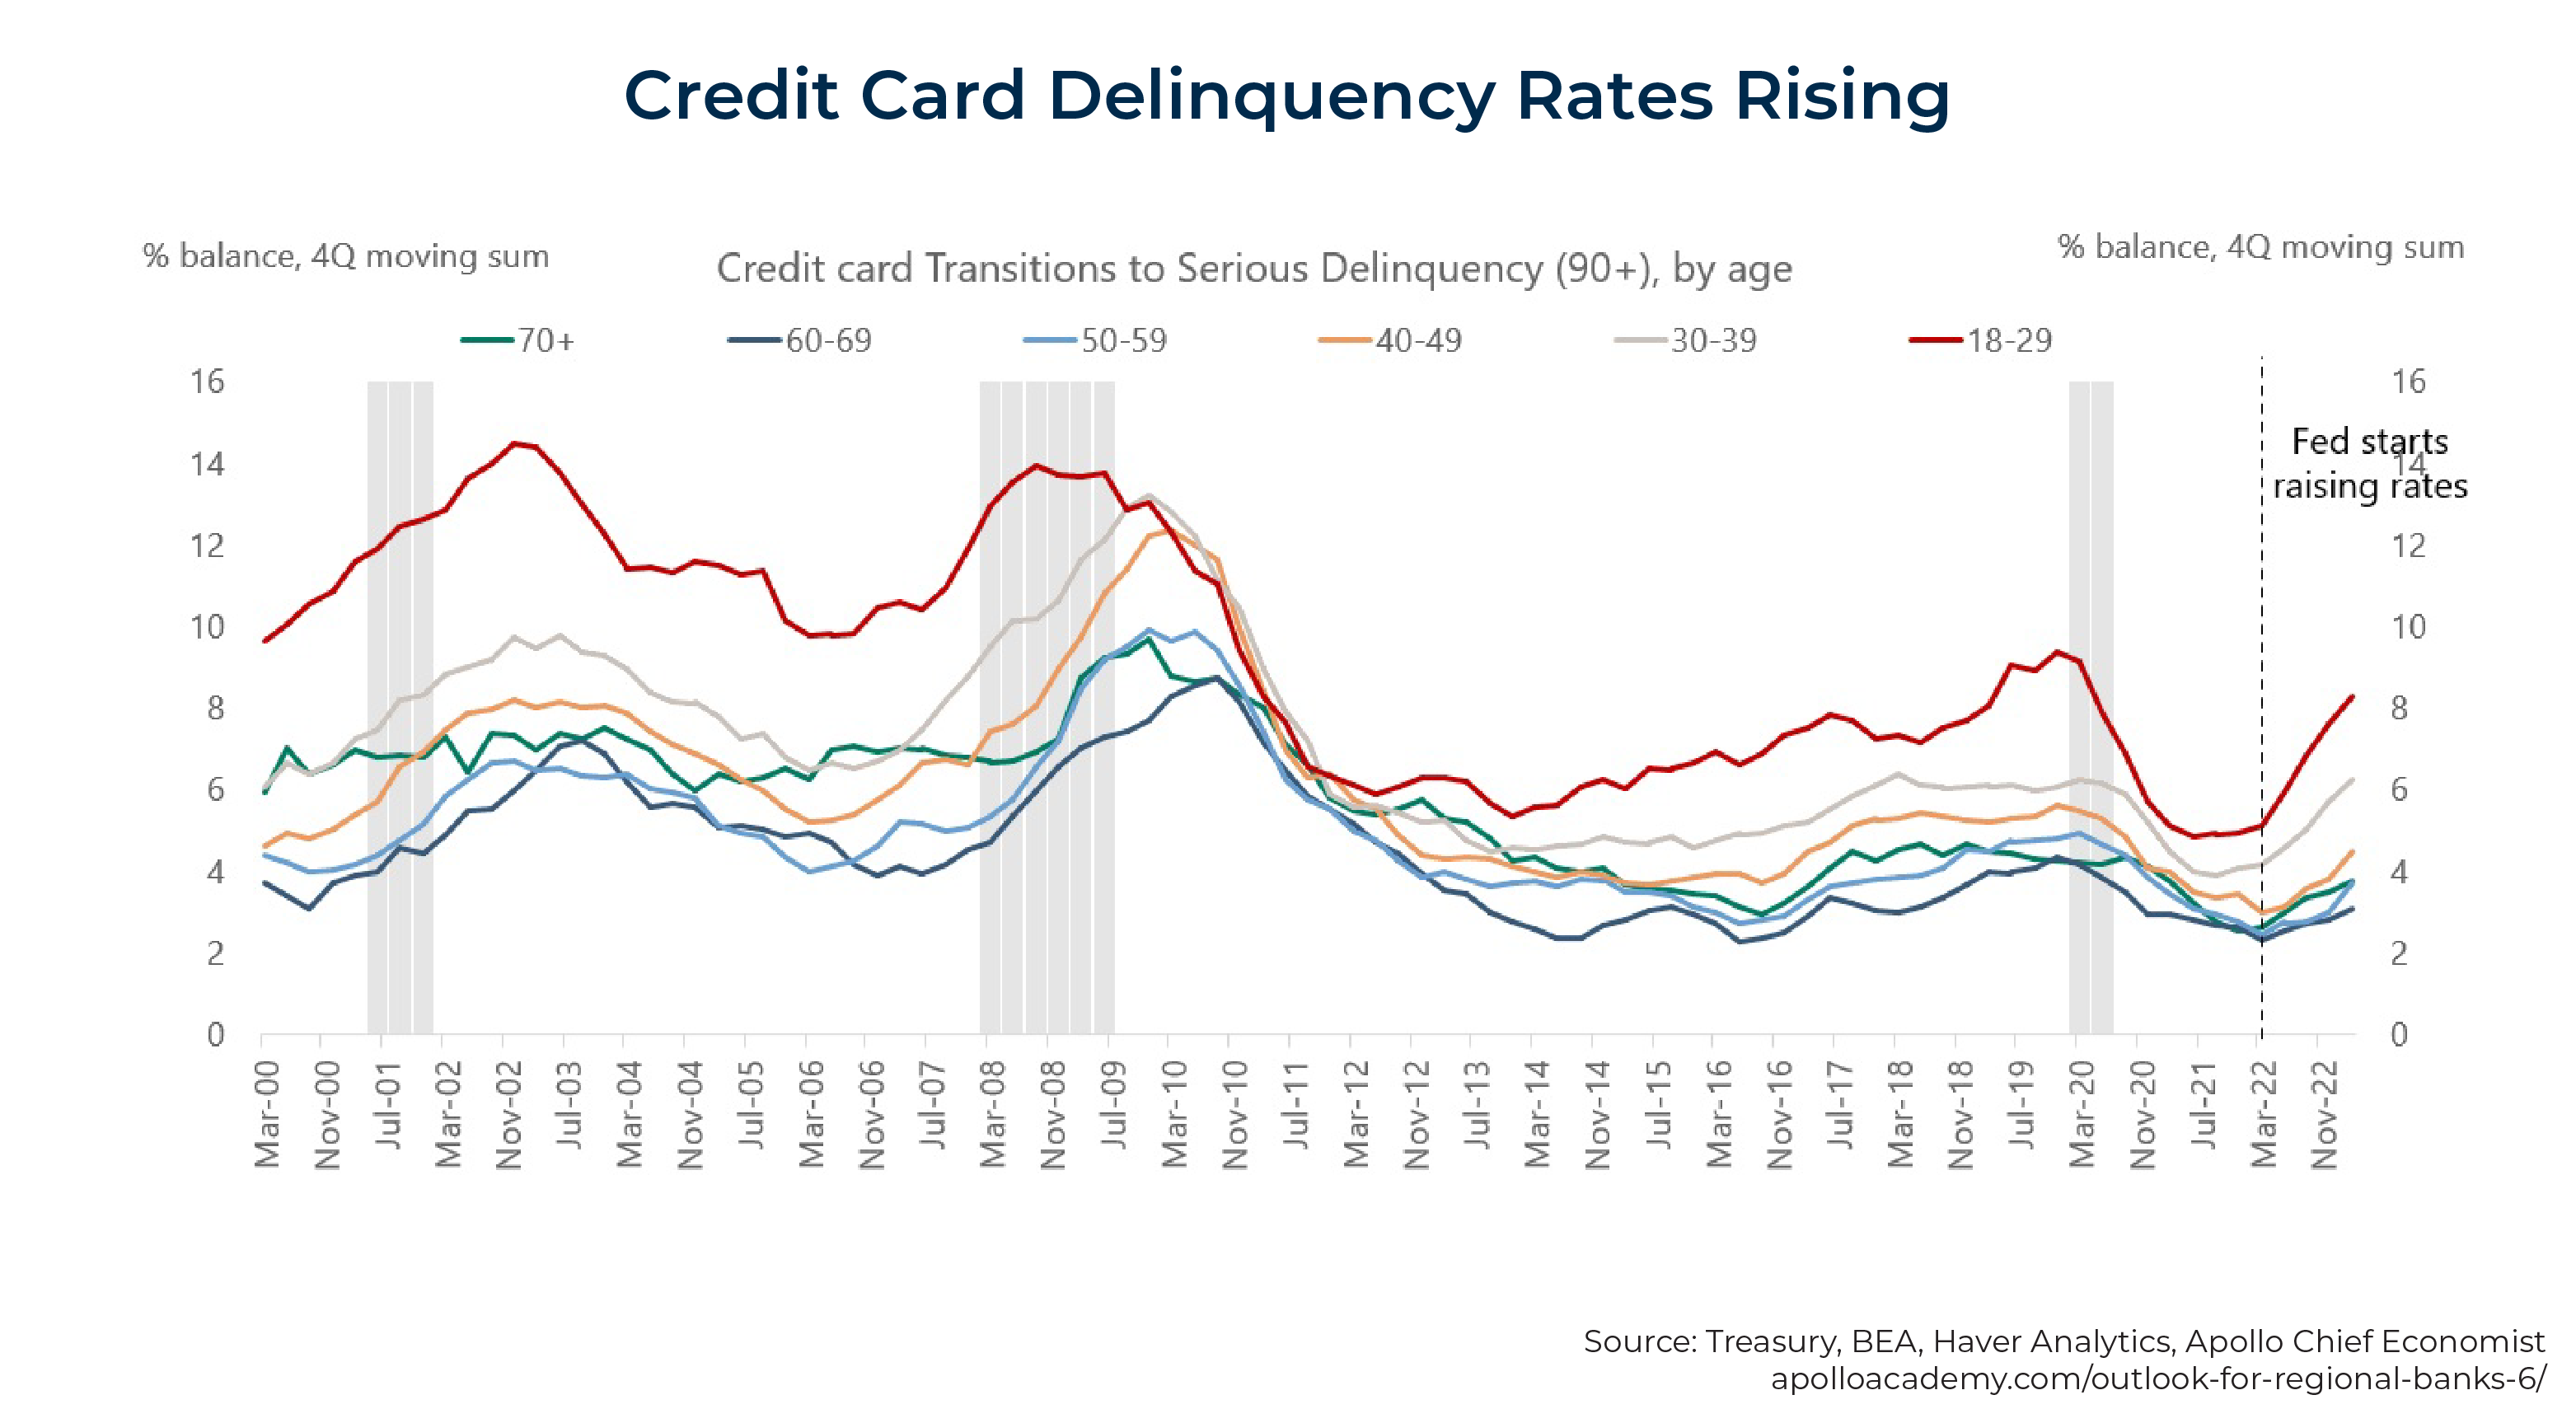 A Credit Card Delinquency Rates Rising